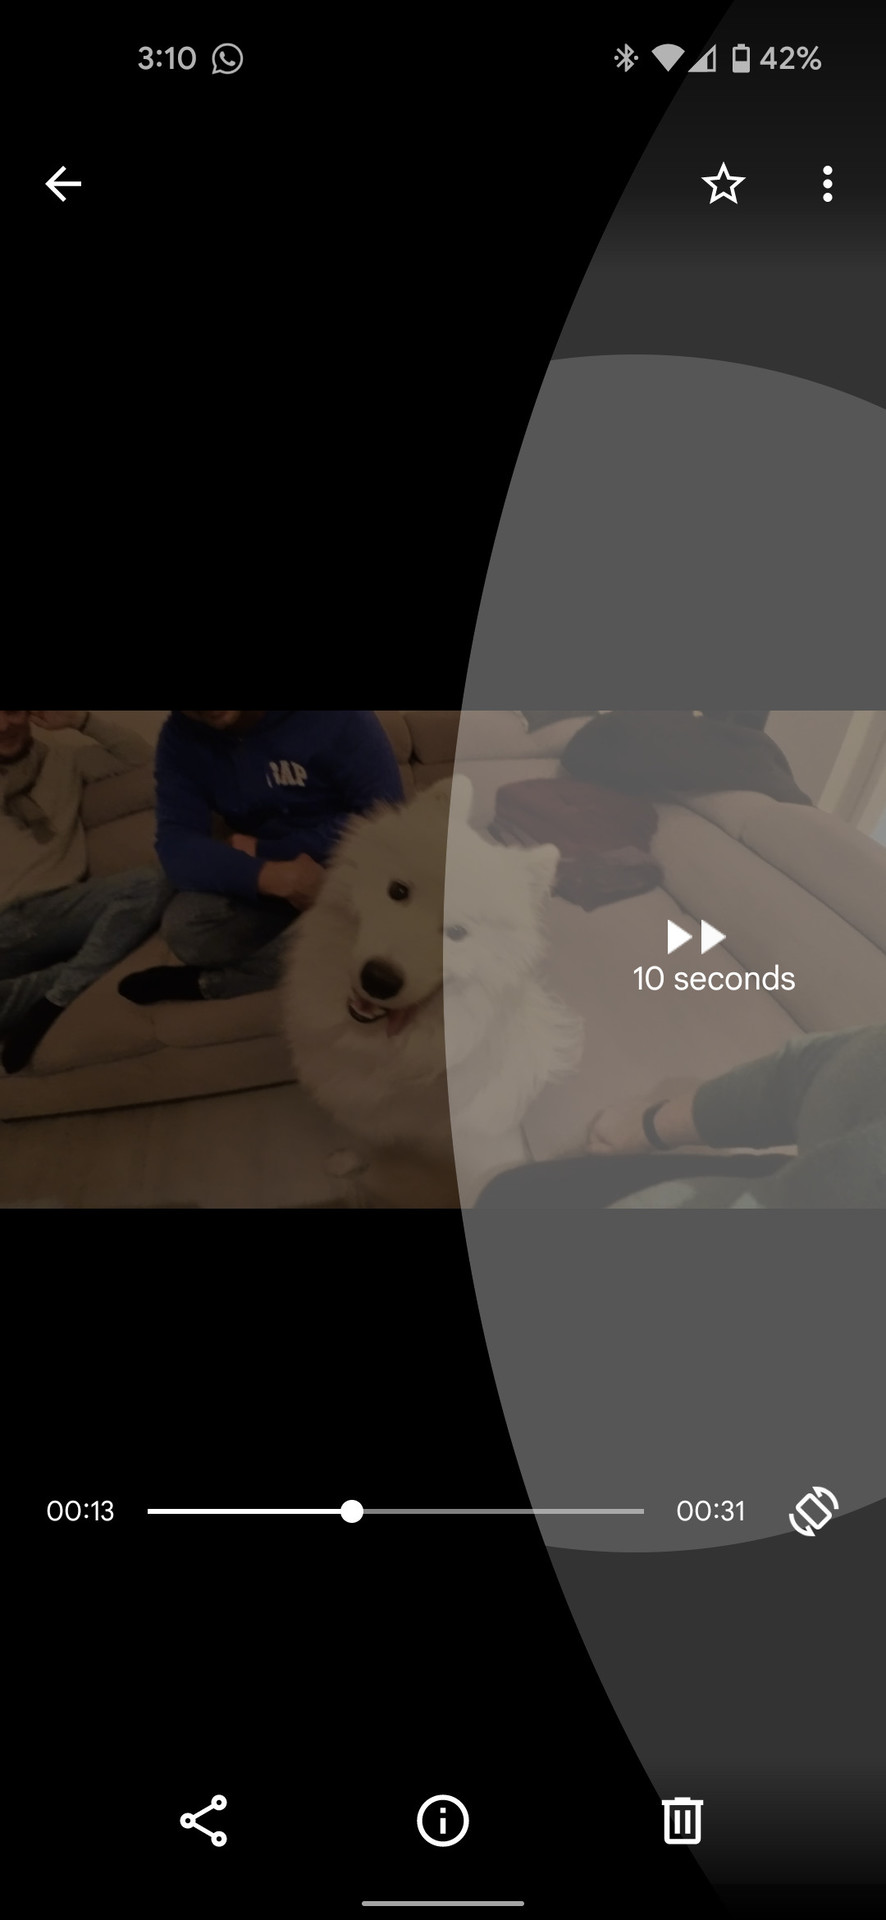 Google Files showing a dog video with skip gesture overlay.